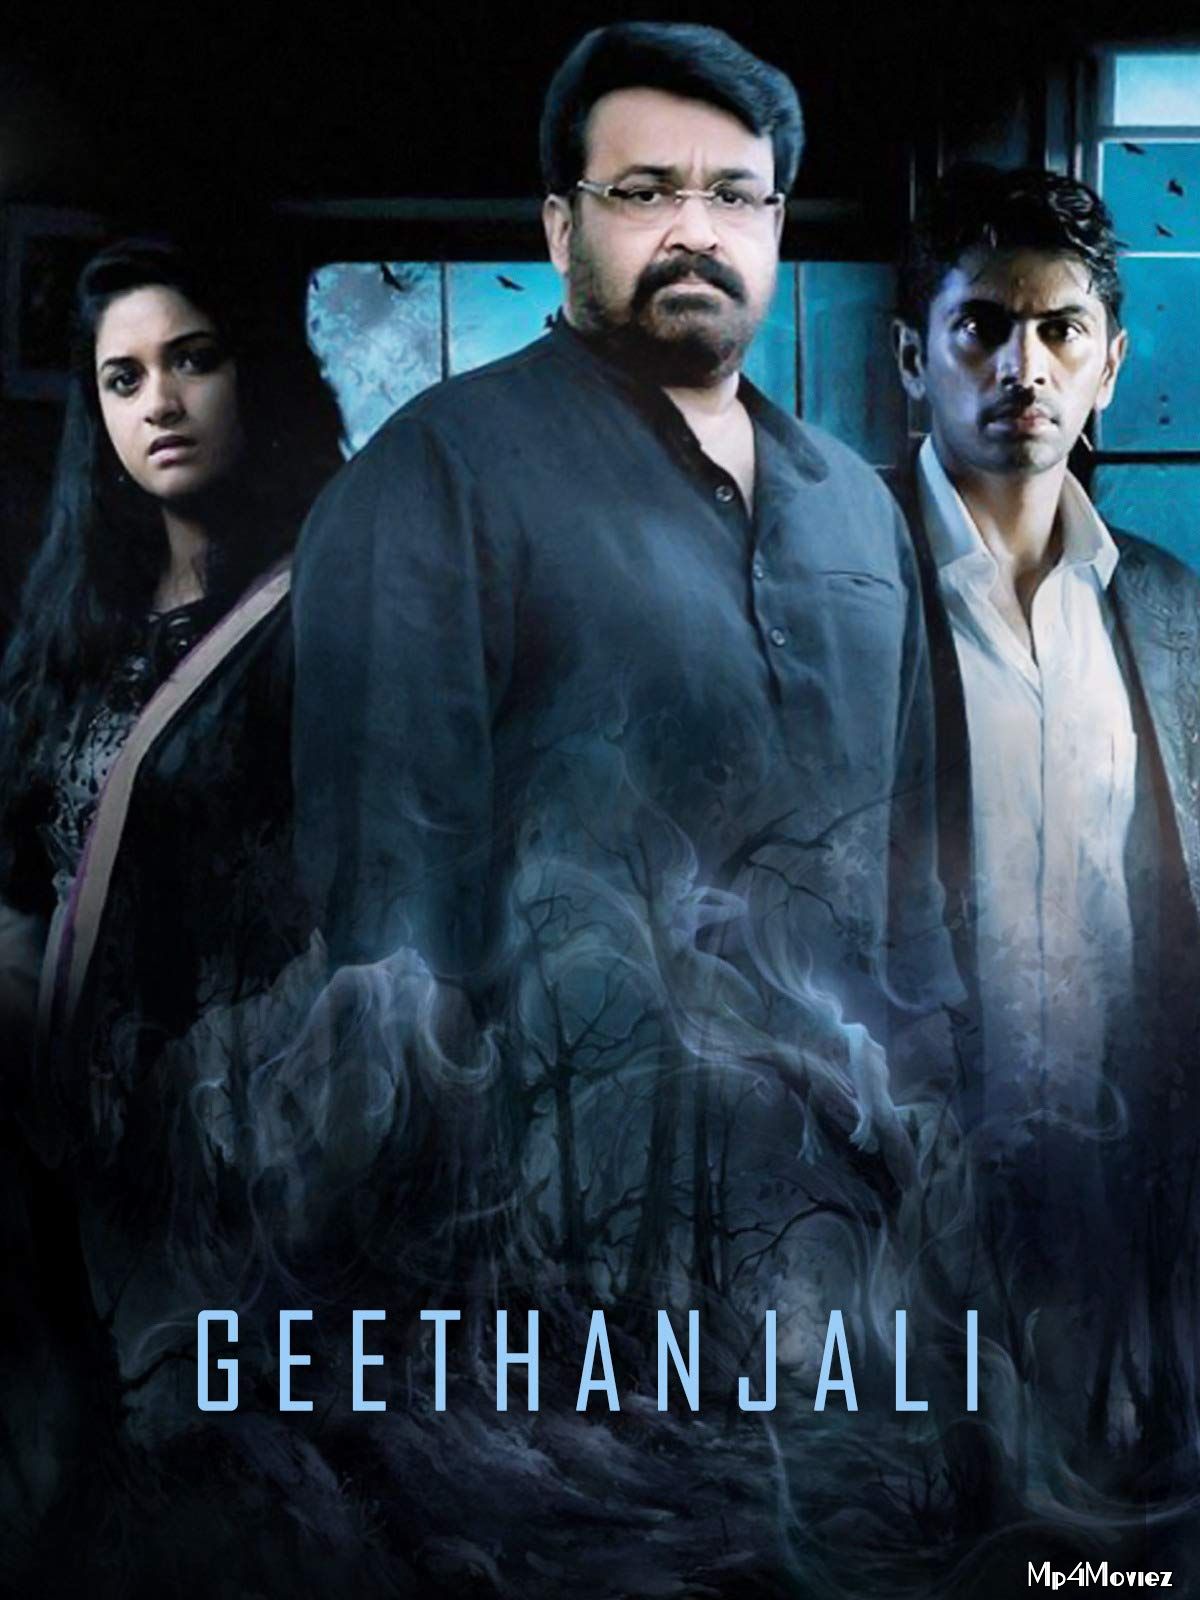 Geethanjali (2021) Hindi Dubbed Movie download full movie